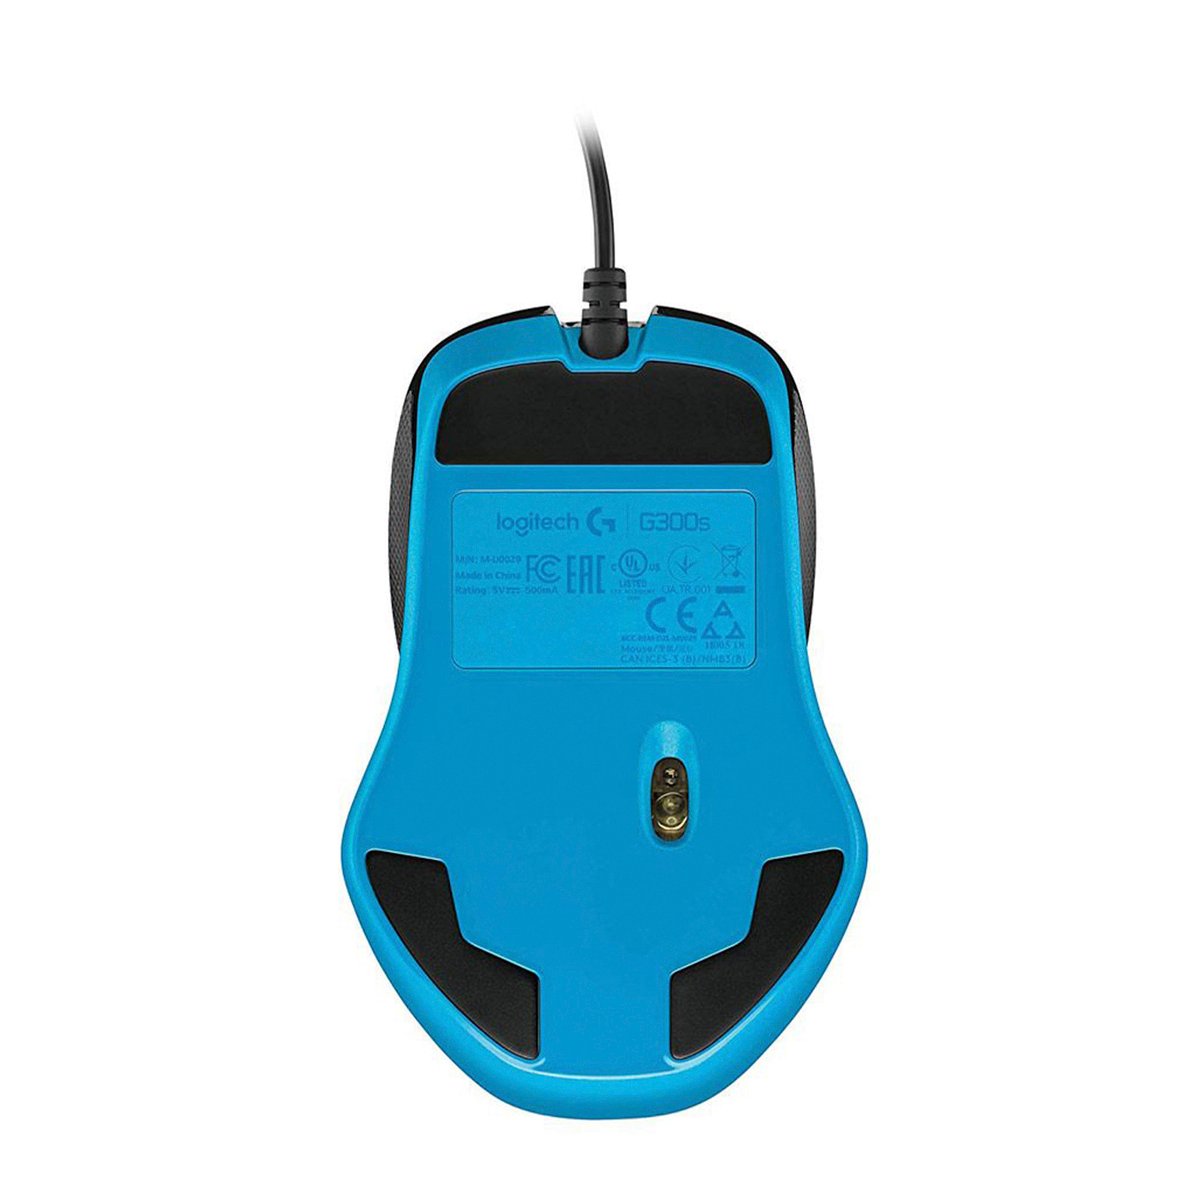 Logitech G300S Wired Gaming Mouse PC